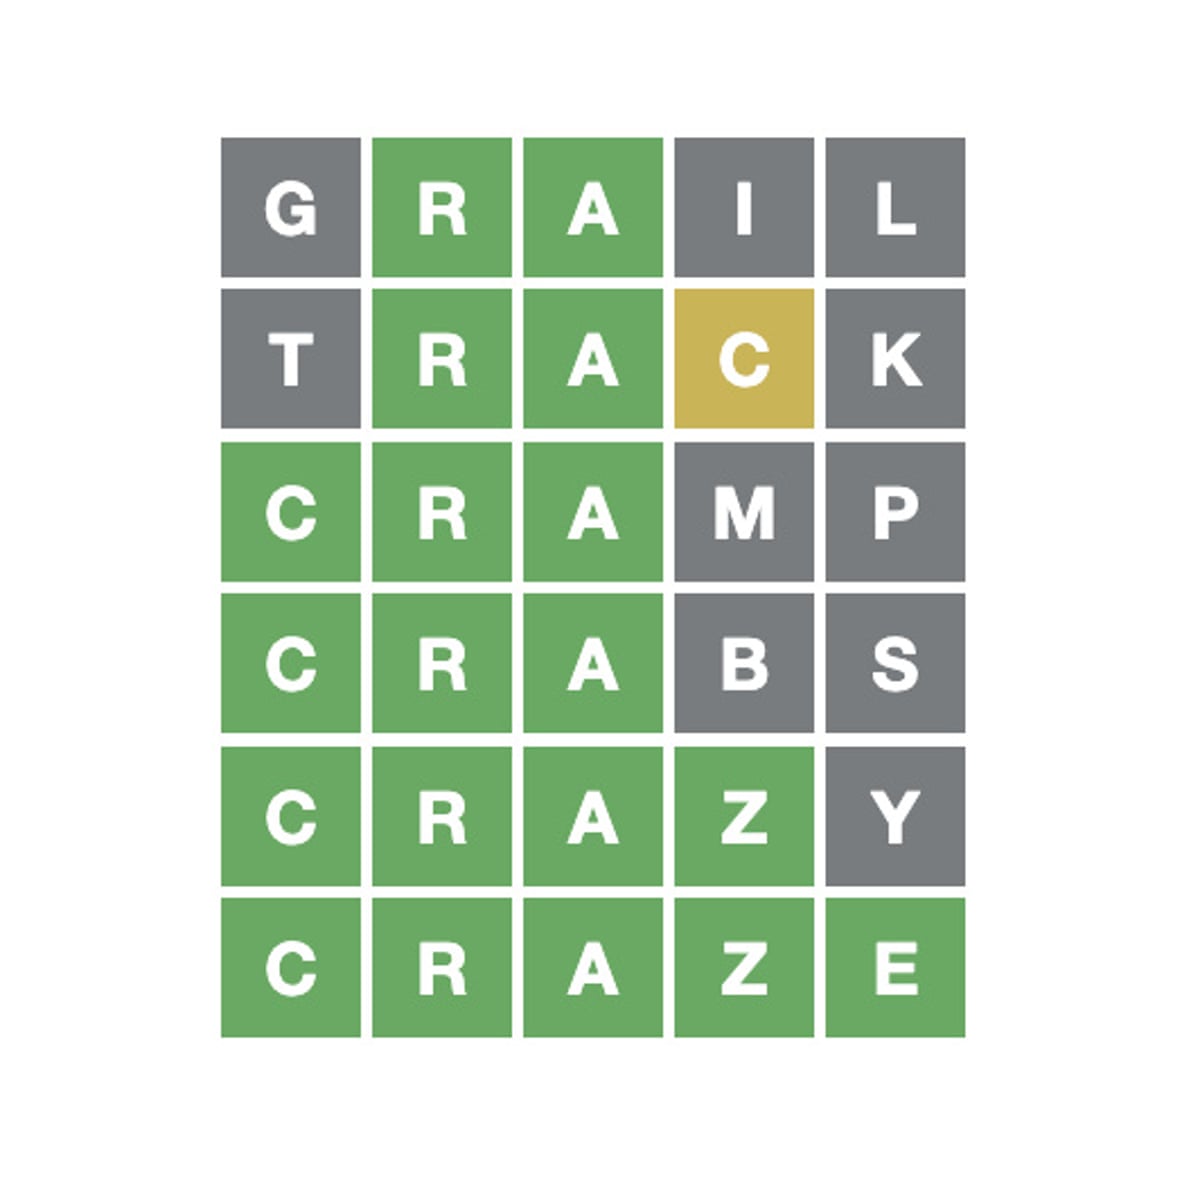 Wordly ‑ Daily Word Puzzle